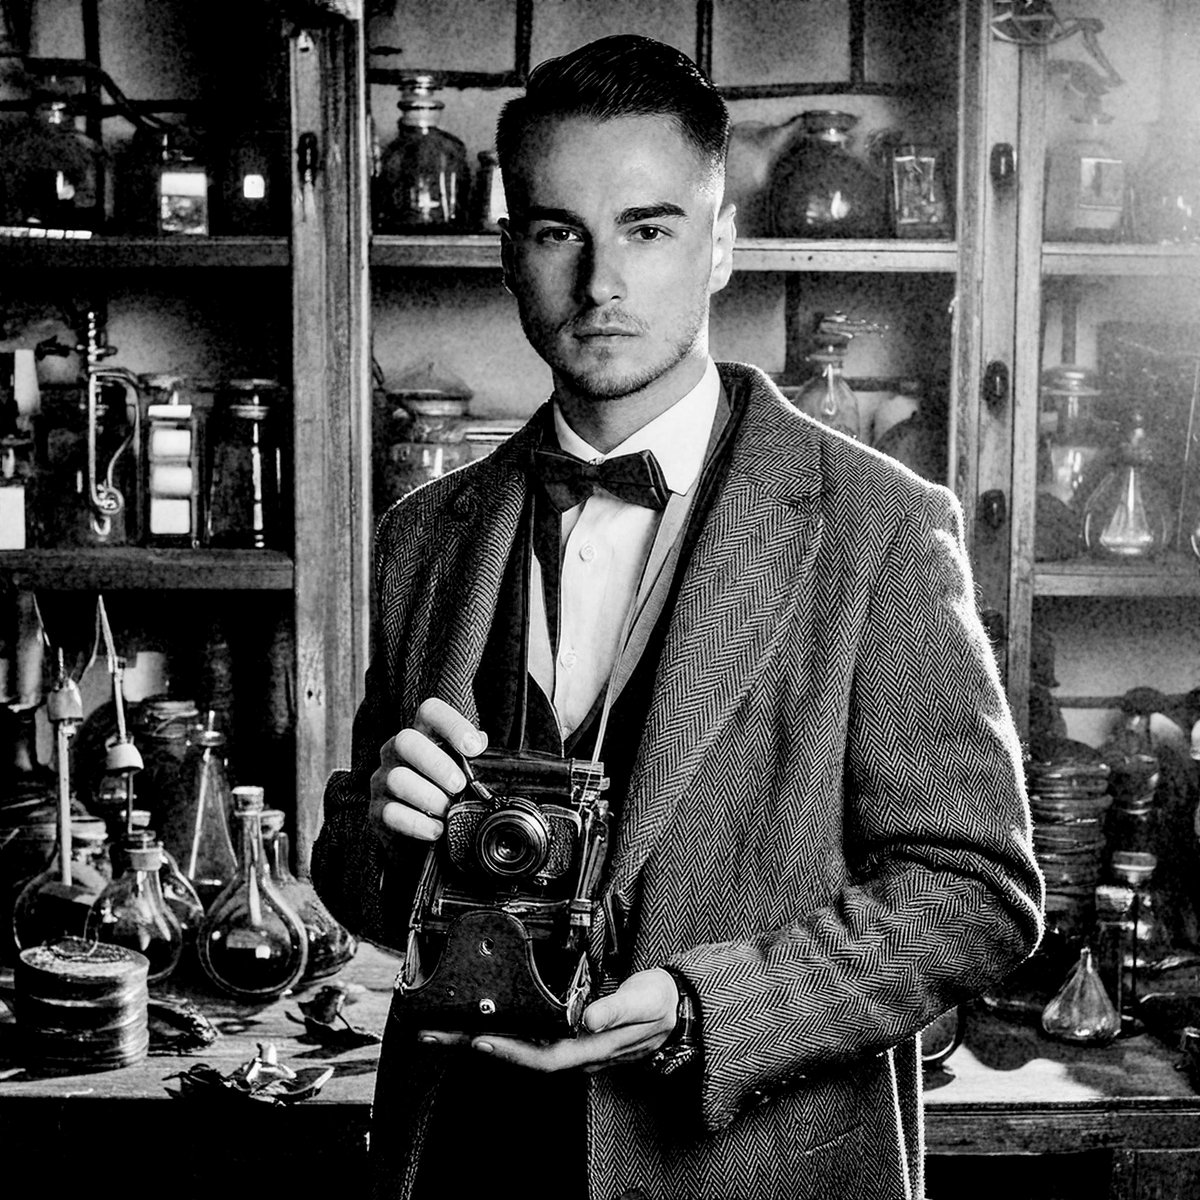 I'd absolutely love to see a reimagined Spider-Man taking place in turn-of-the-century London, in film noir style, where Peter Parker is bitten by a radioactive spider while visiting Marie Curie's lab in Paris in 1902.

#SpiderMan #MarieCurie #FilmNoir

(Photo by #AdobeFirefly)